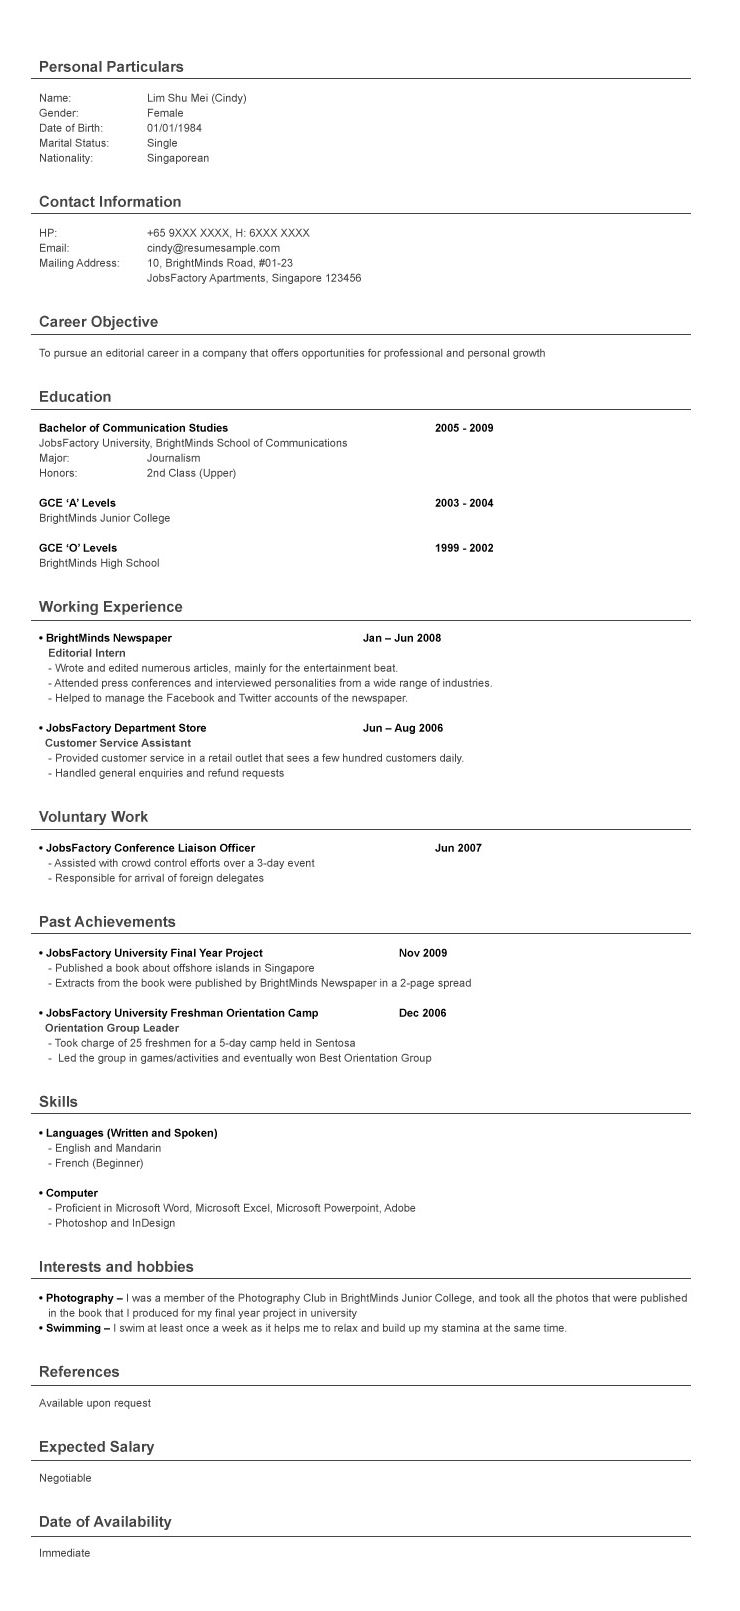 How To Write A Resume For A Job Resume how to write a resume for a job|wikiresume.com